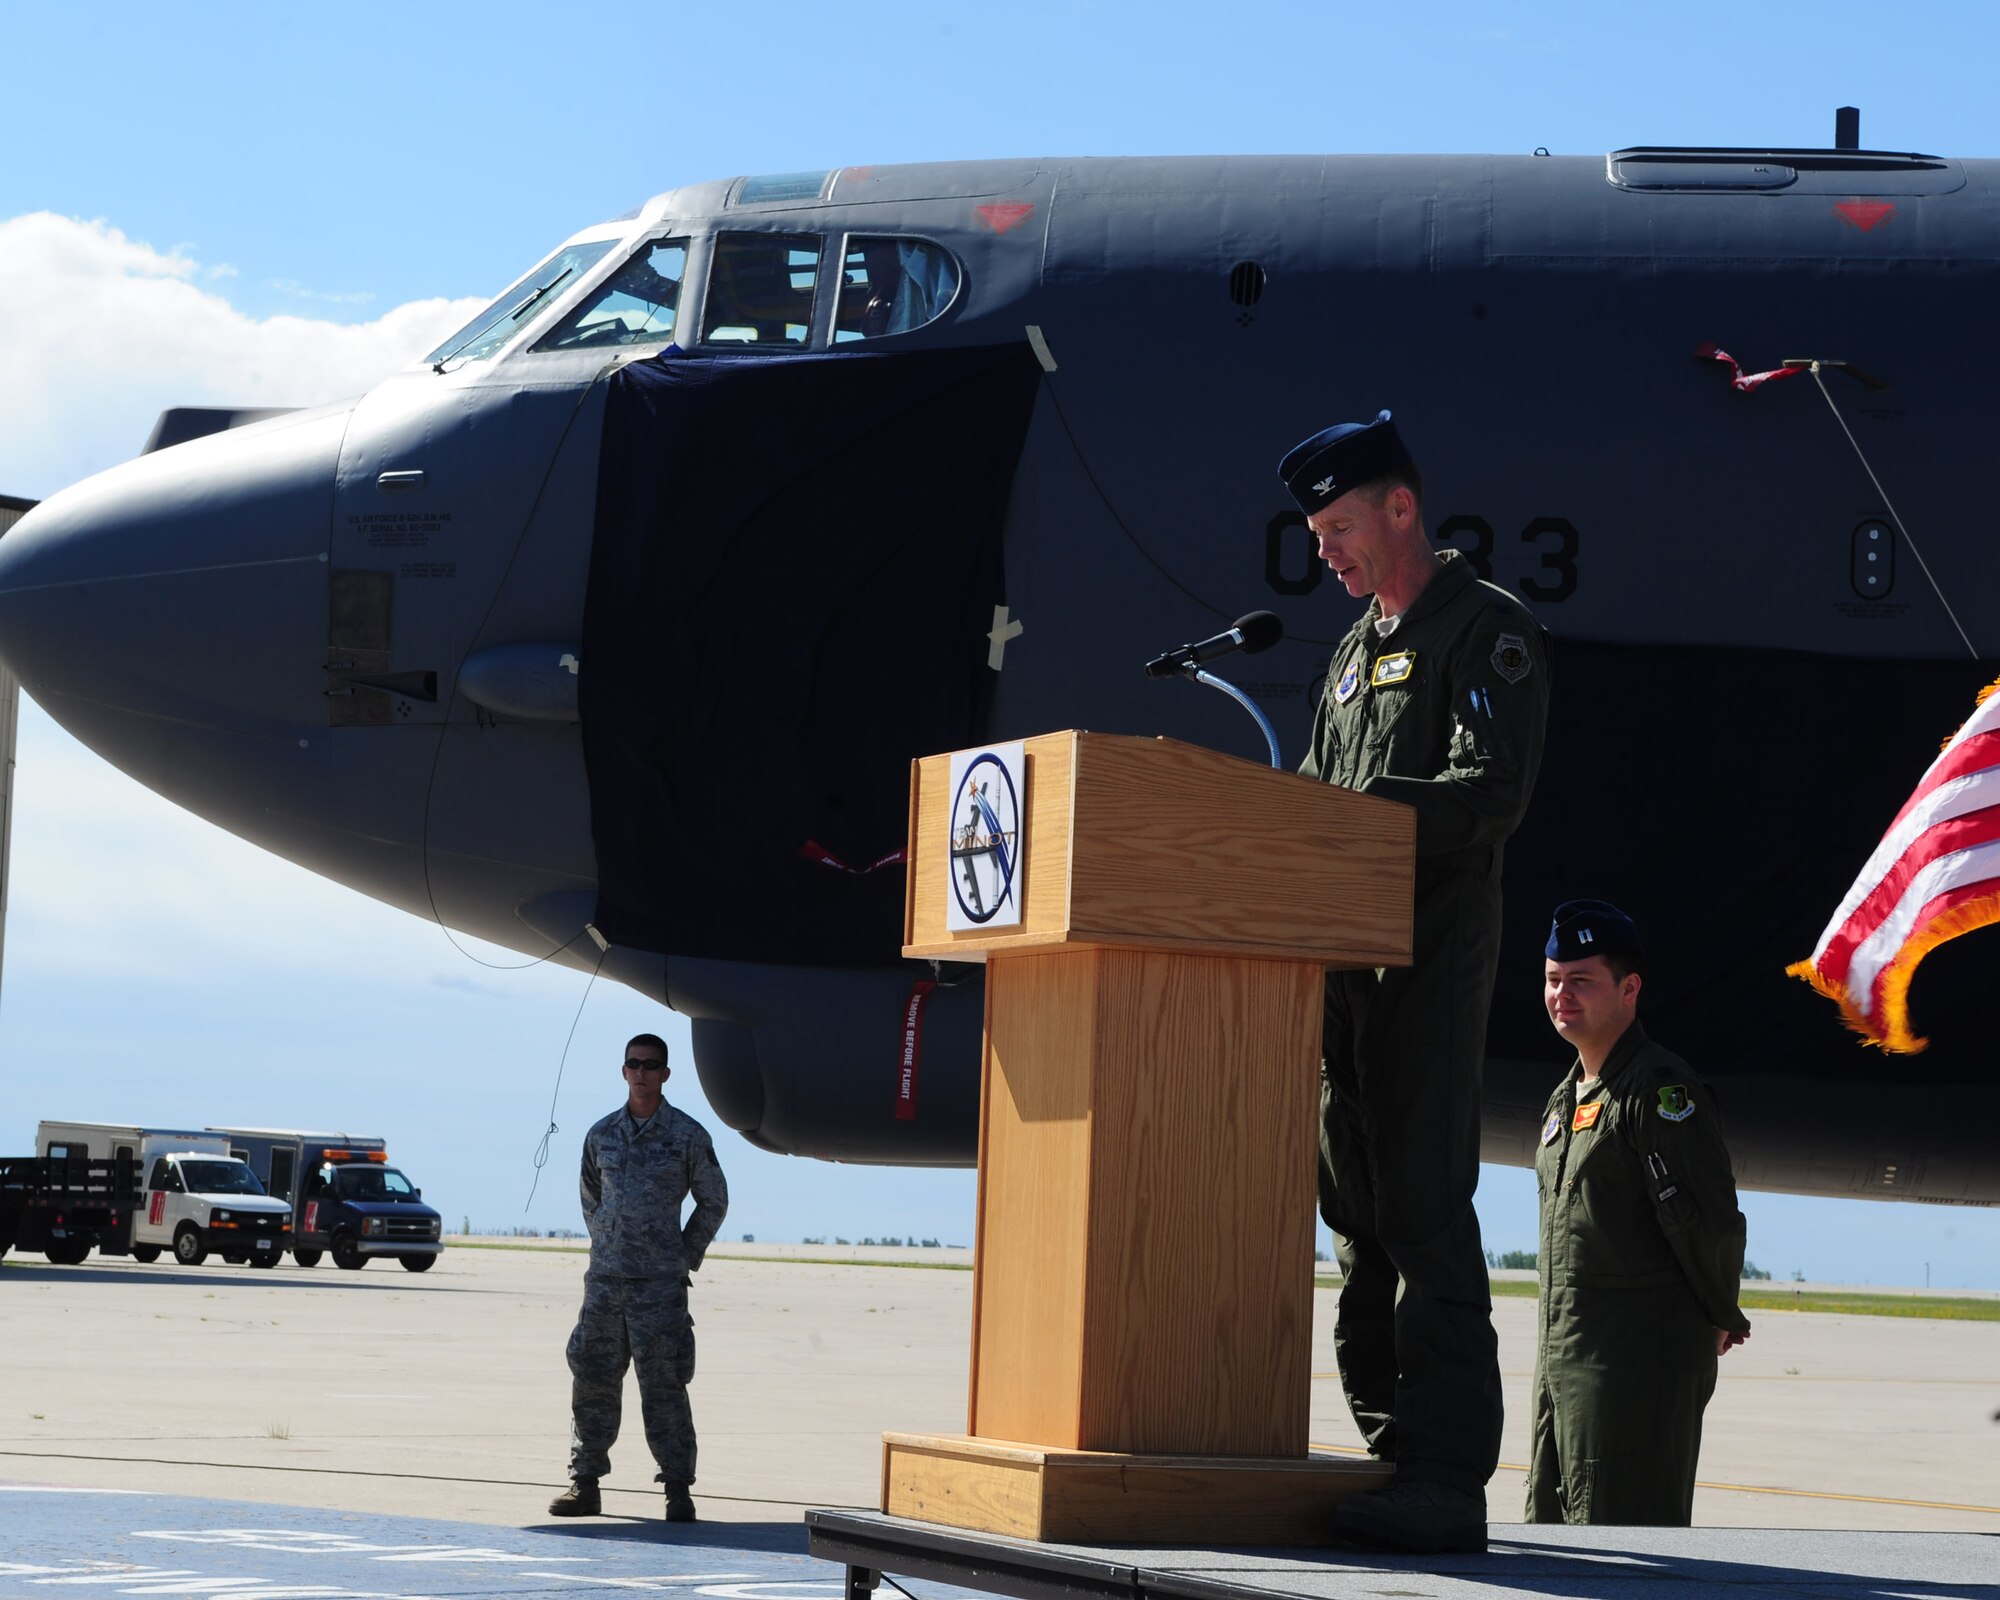 MINOT AIR FORCE BASE, N.D. -- Col. James Dawkins, 5th Bomb Wing commander, speaks to Airmen during the 50th anniversary of the B-52H Stratofortess’s arrival to Minot here Aug. 19. The B-52, named the “Peace Persuader,” had nostalgic nose art painted on the airframe to commemorate the history of the aircraft. (U.S. Air Force photo/Senior Airman Michael J. Veloz)